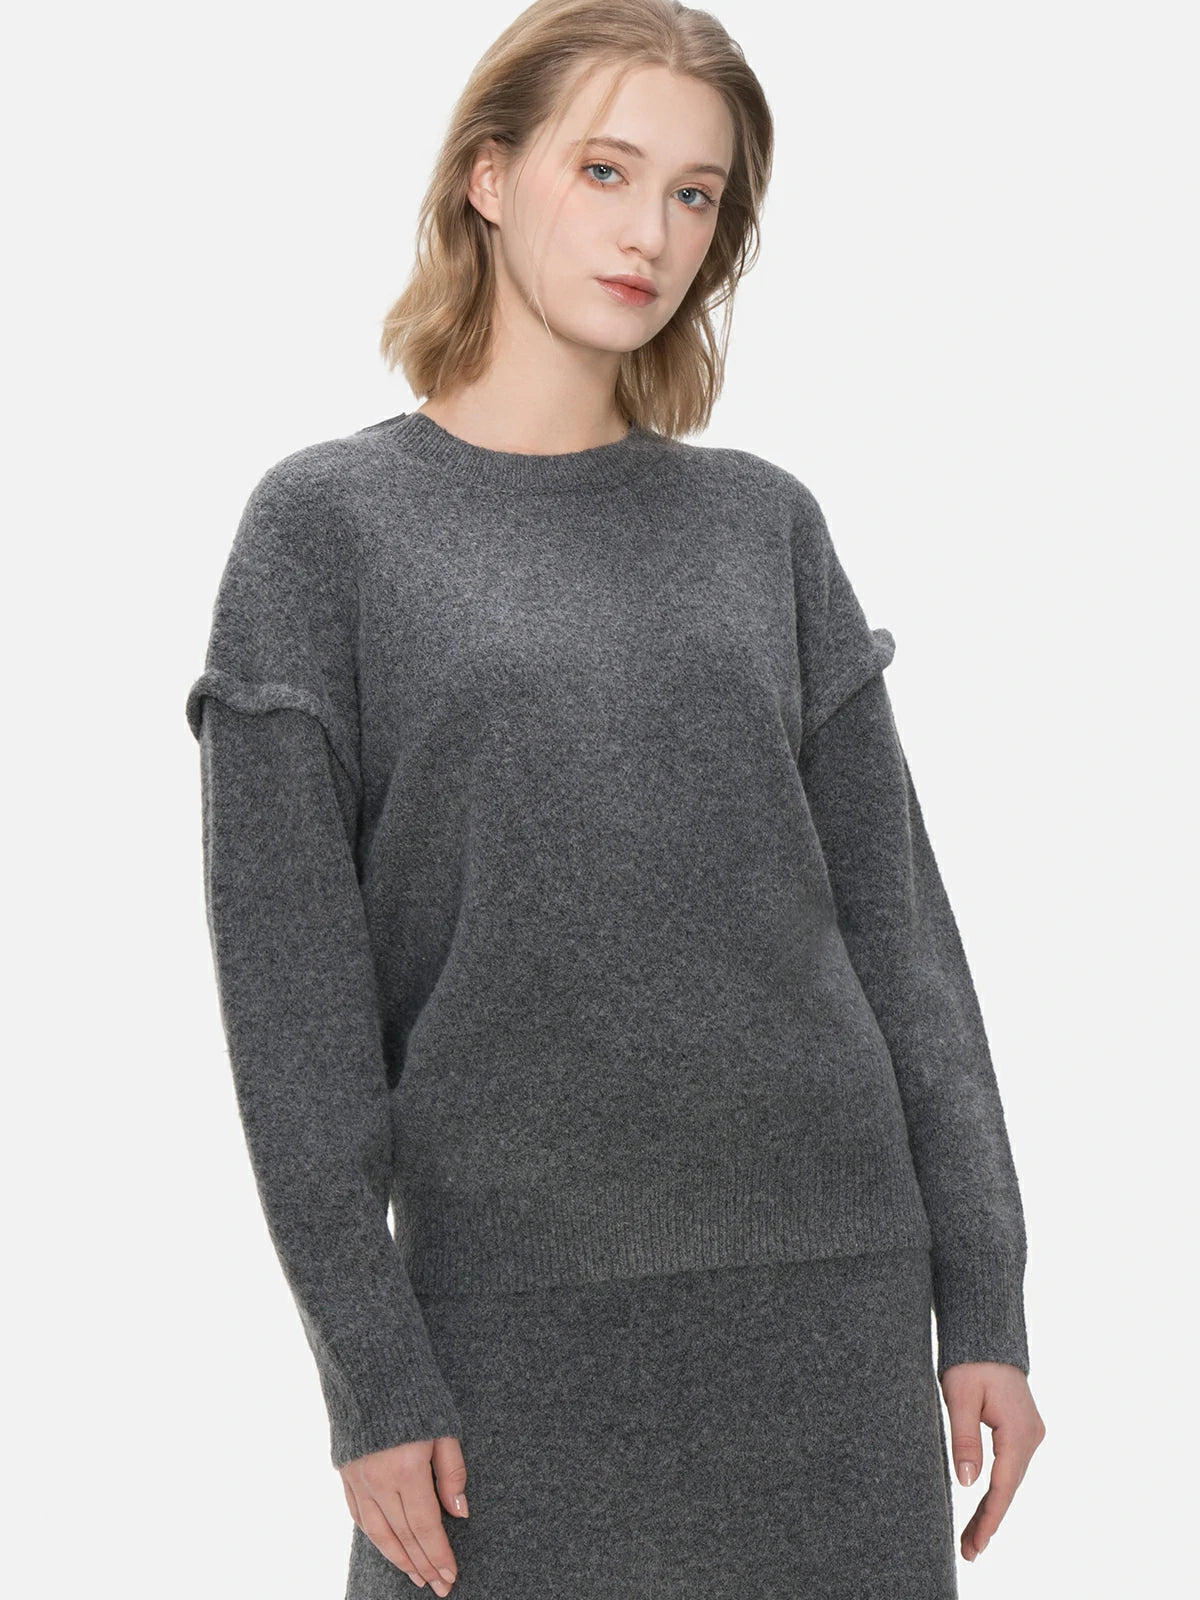 Redefine your knitwear collection with this versatile gray sweater, boasting a round-neck design and a simple yet stylish silhouette.